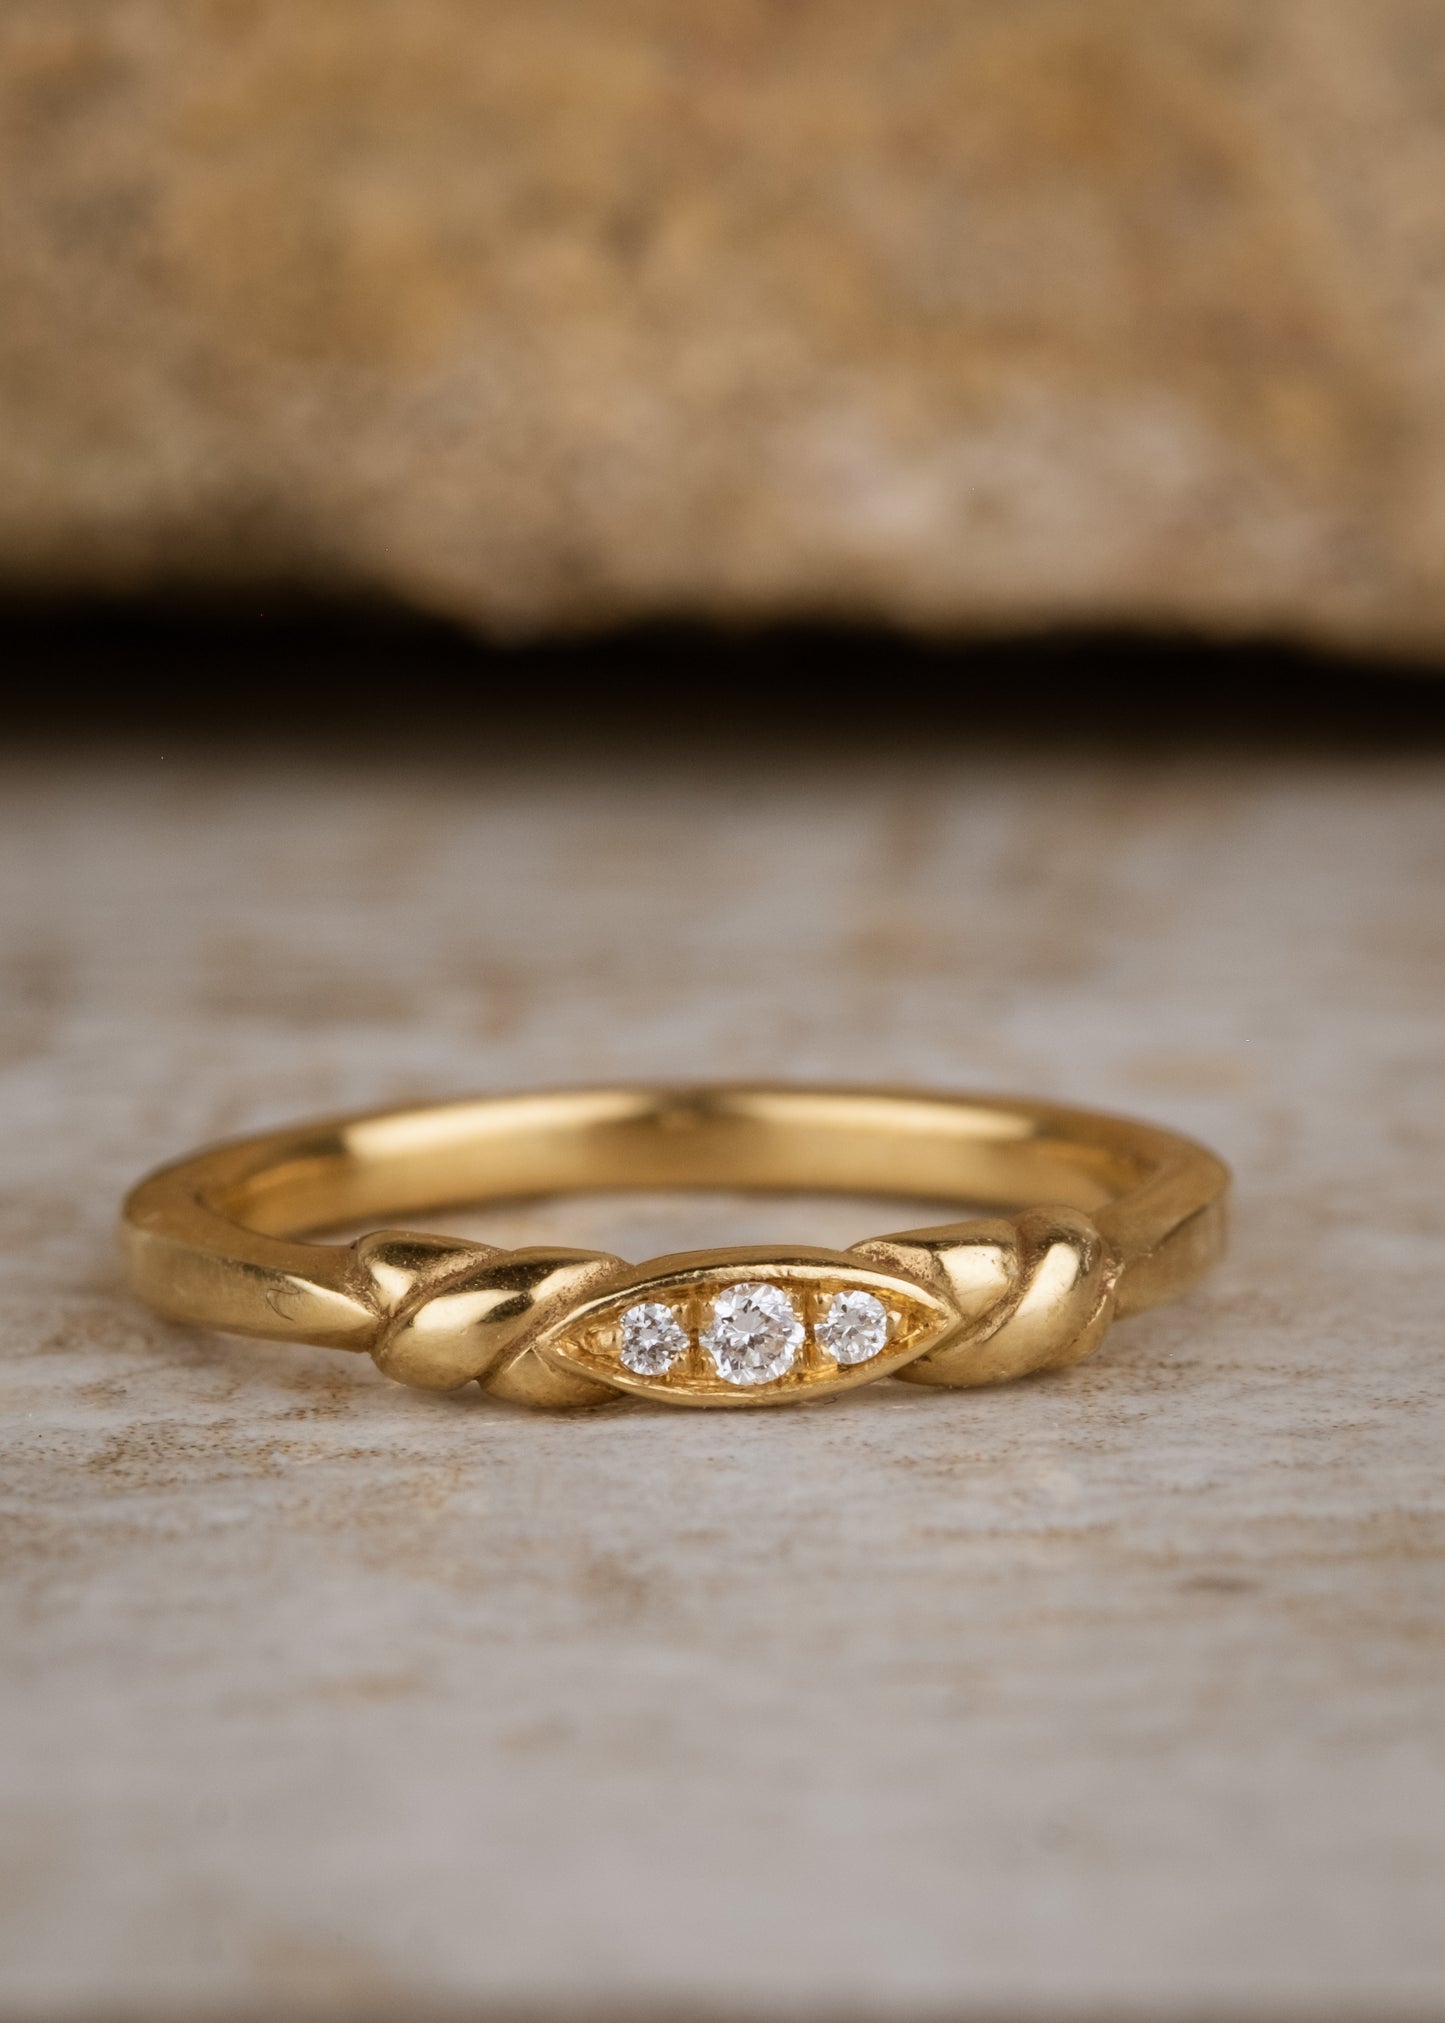 An engagement ring re-imagined, the Kiat ring was inspired by a proposal among sun-soaked cattails and waves lapping the shores of a hidden inlet. A gold band criss-crosses on either side of a trio of diamonds—a piece imbued with promise. 